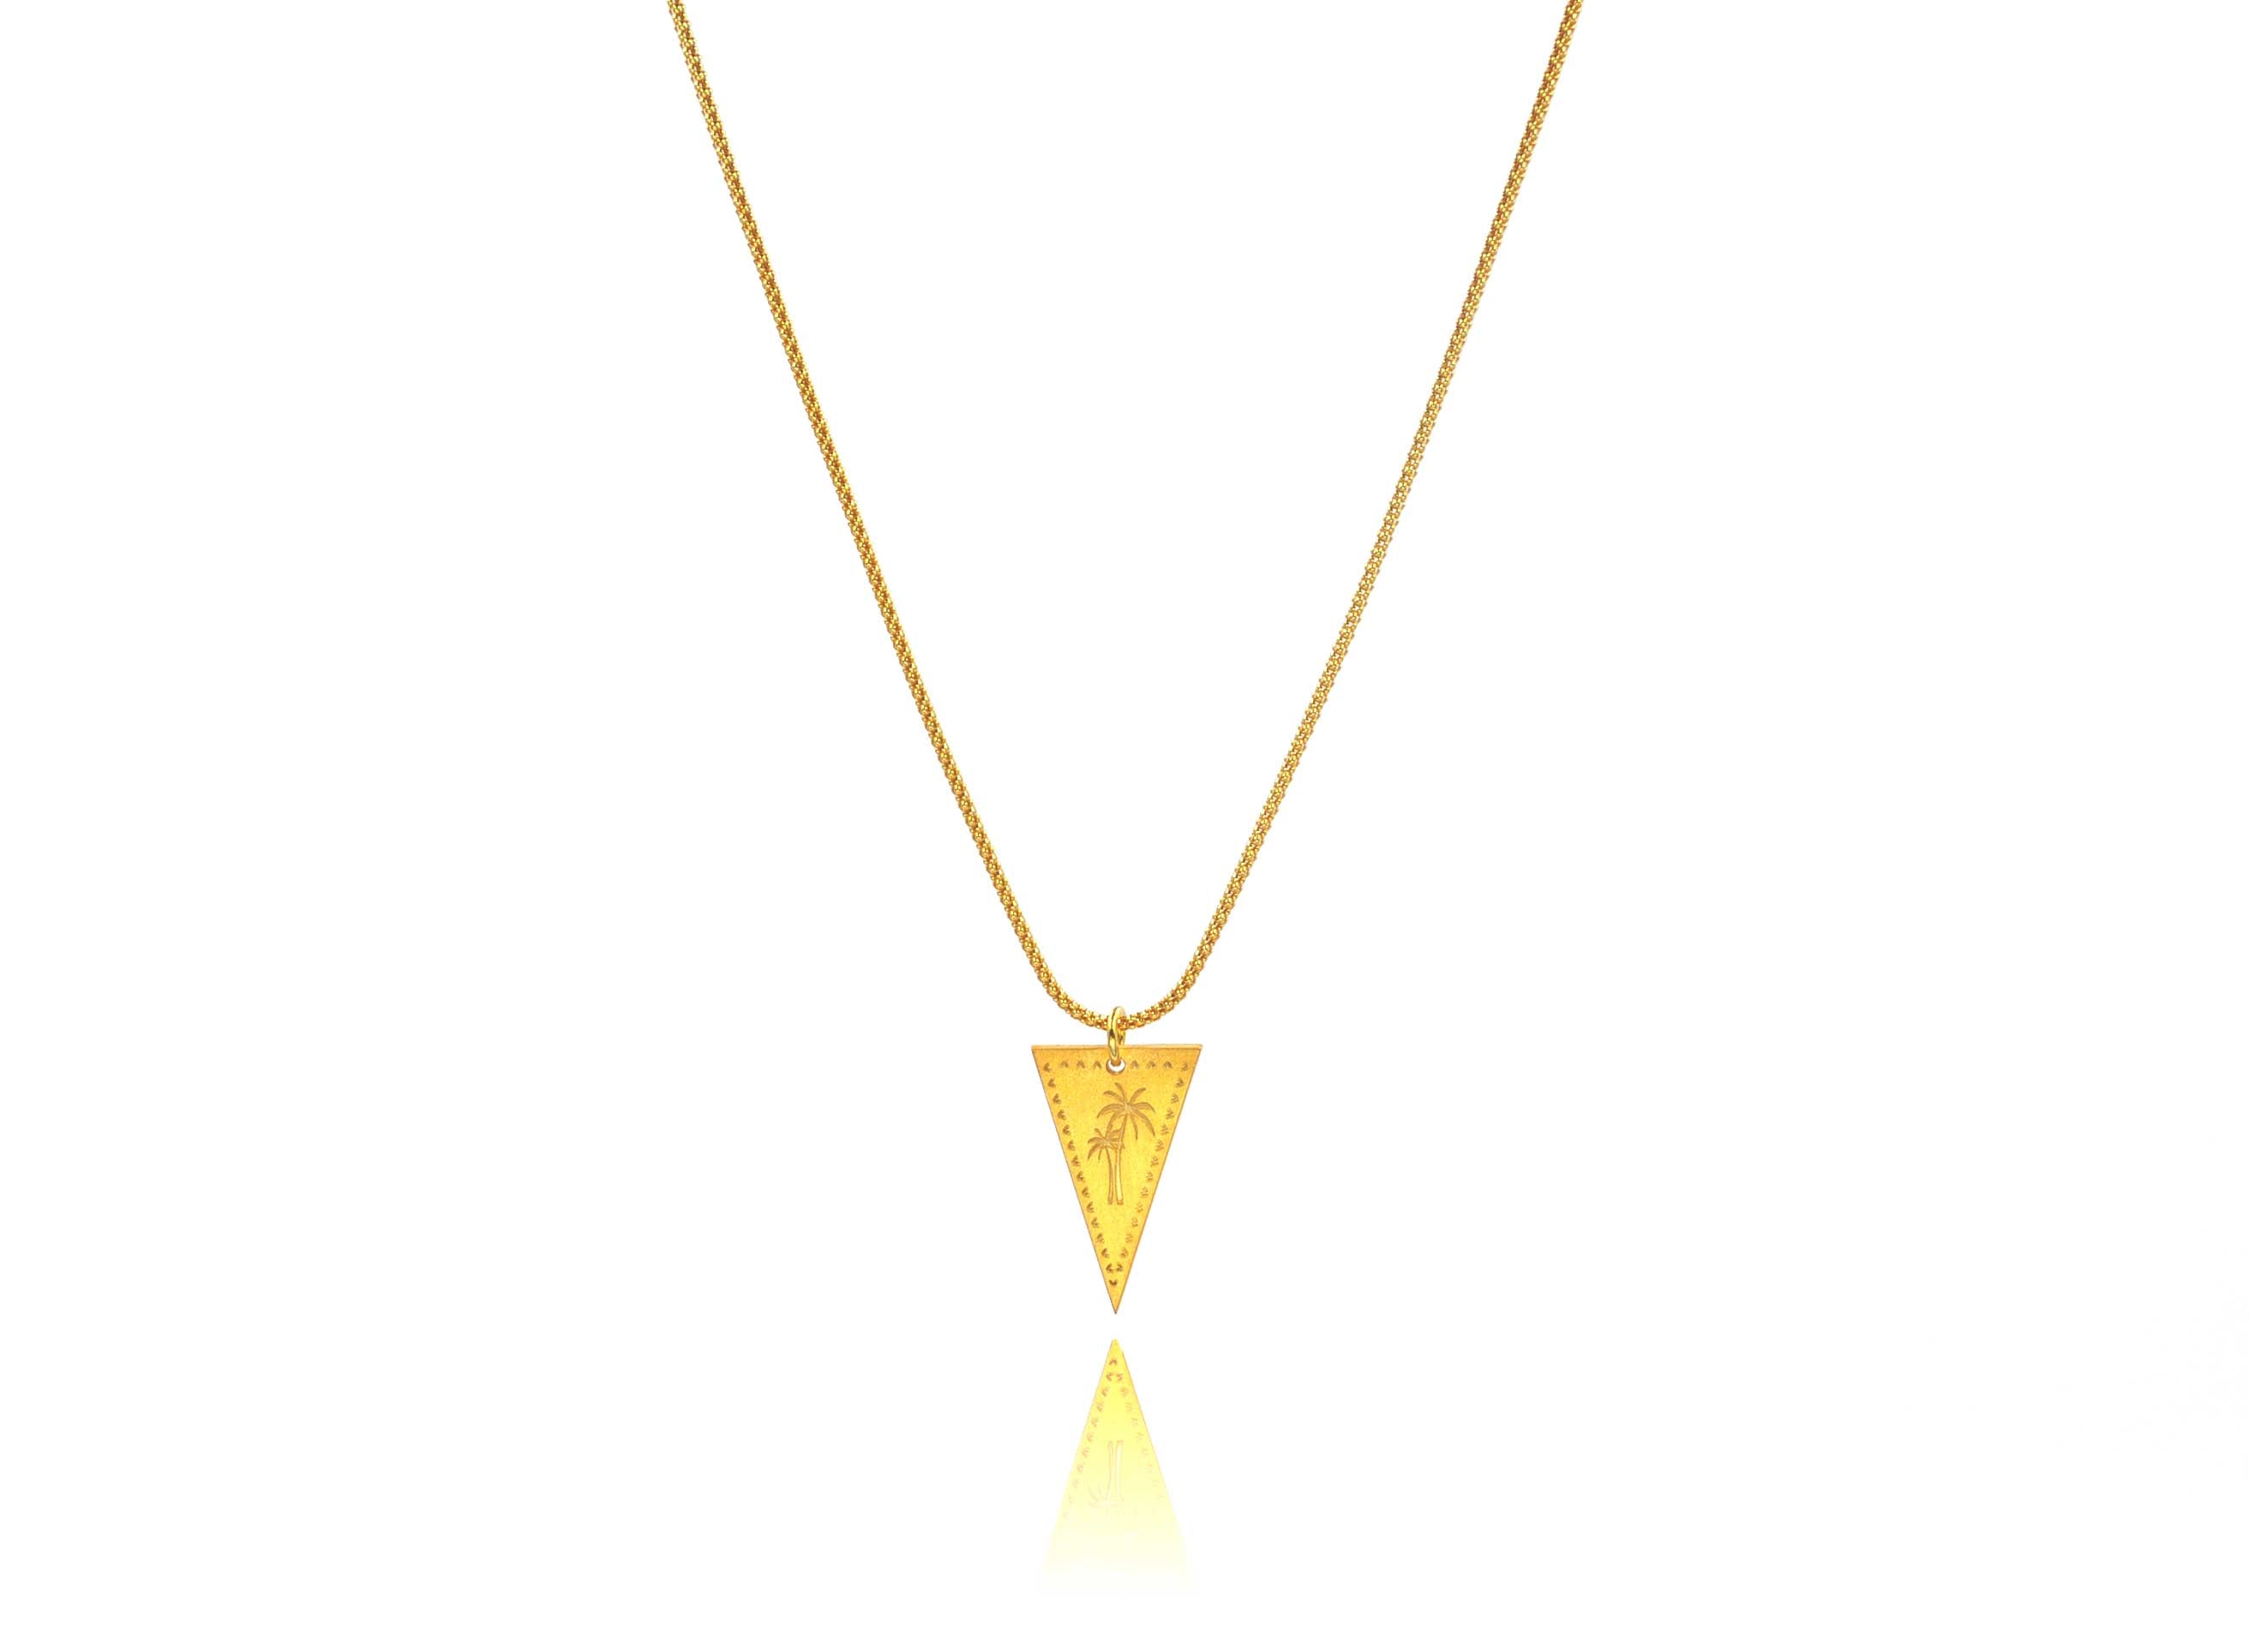 A necklace made of silver 925 gold plated chain and a triangle silver 925 charm plated in gold 24K, with a design'' palm trees''.